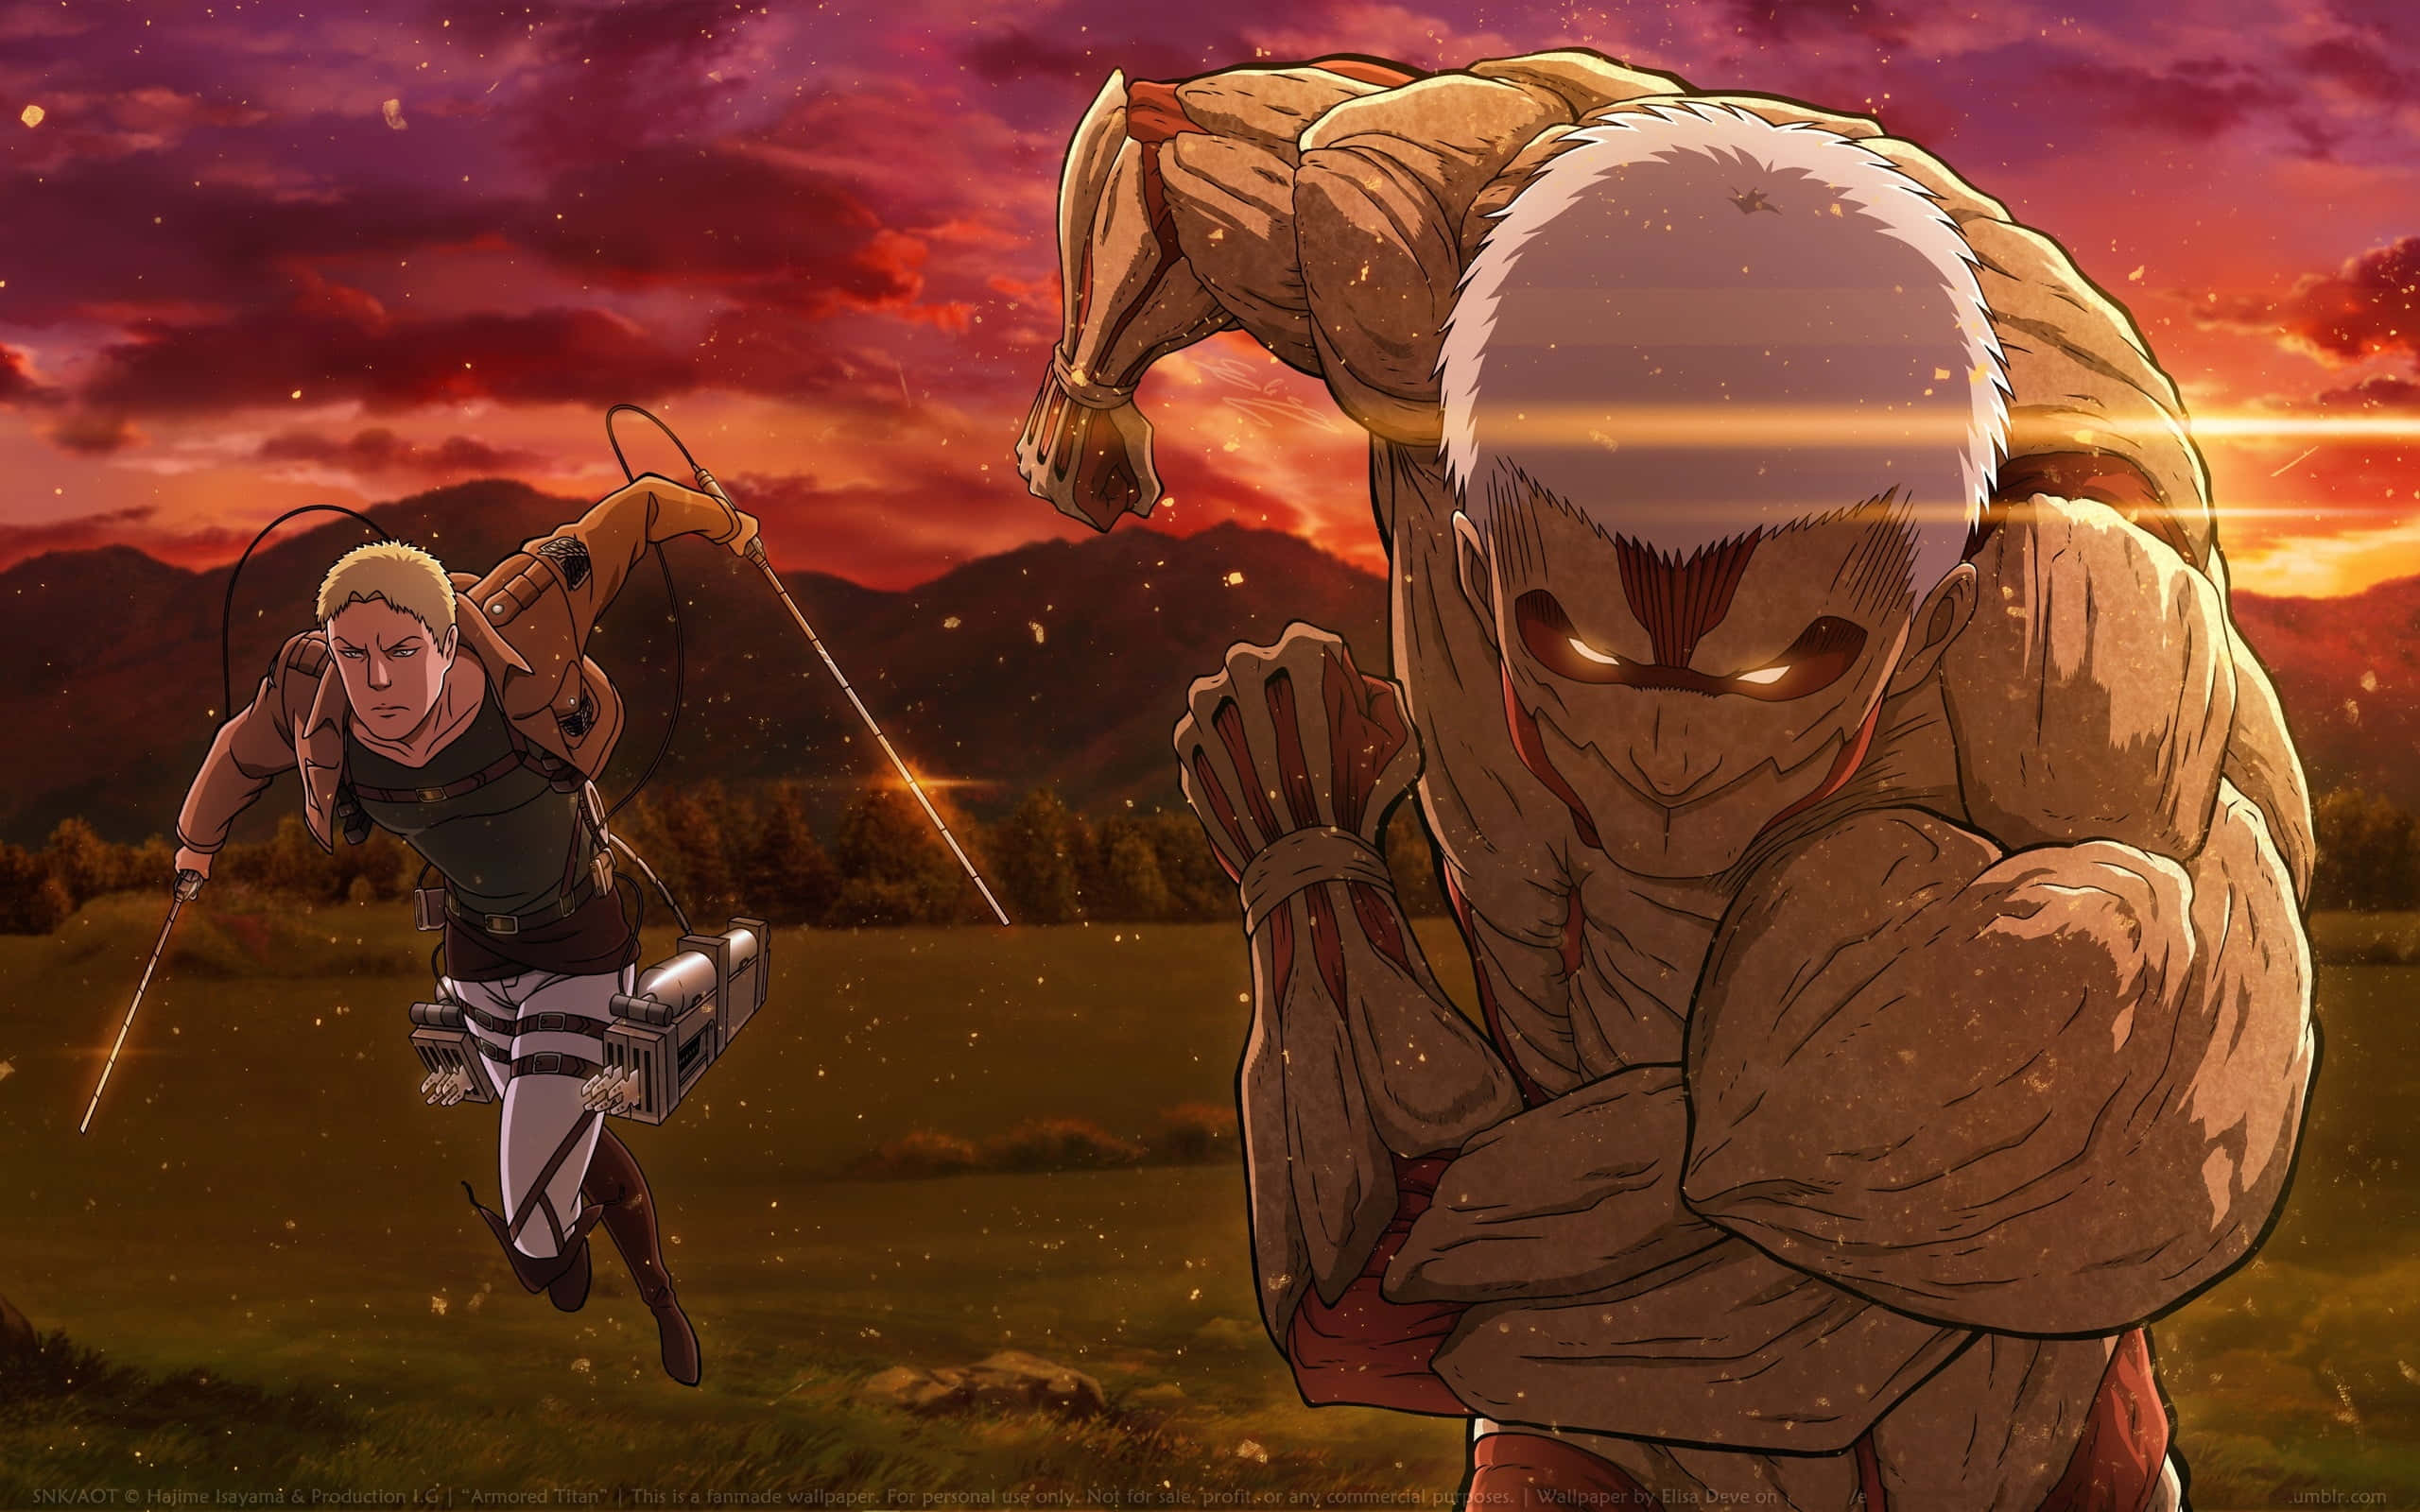 The majestic Armored Titan stands tall against the skyline. Wallpaper